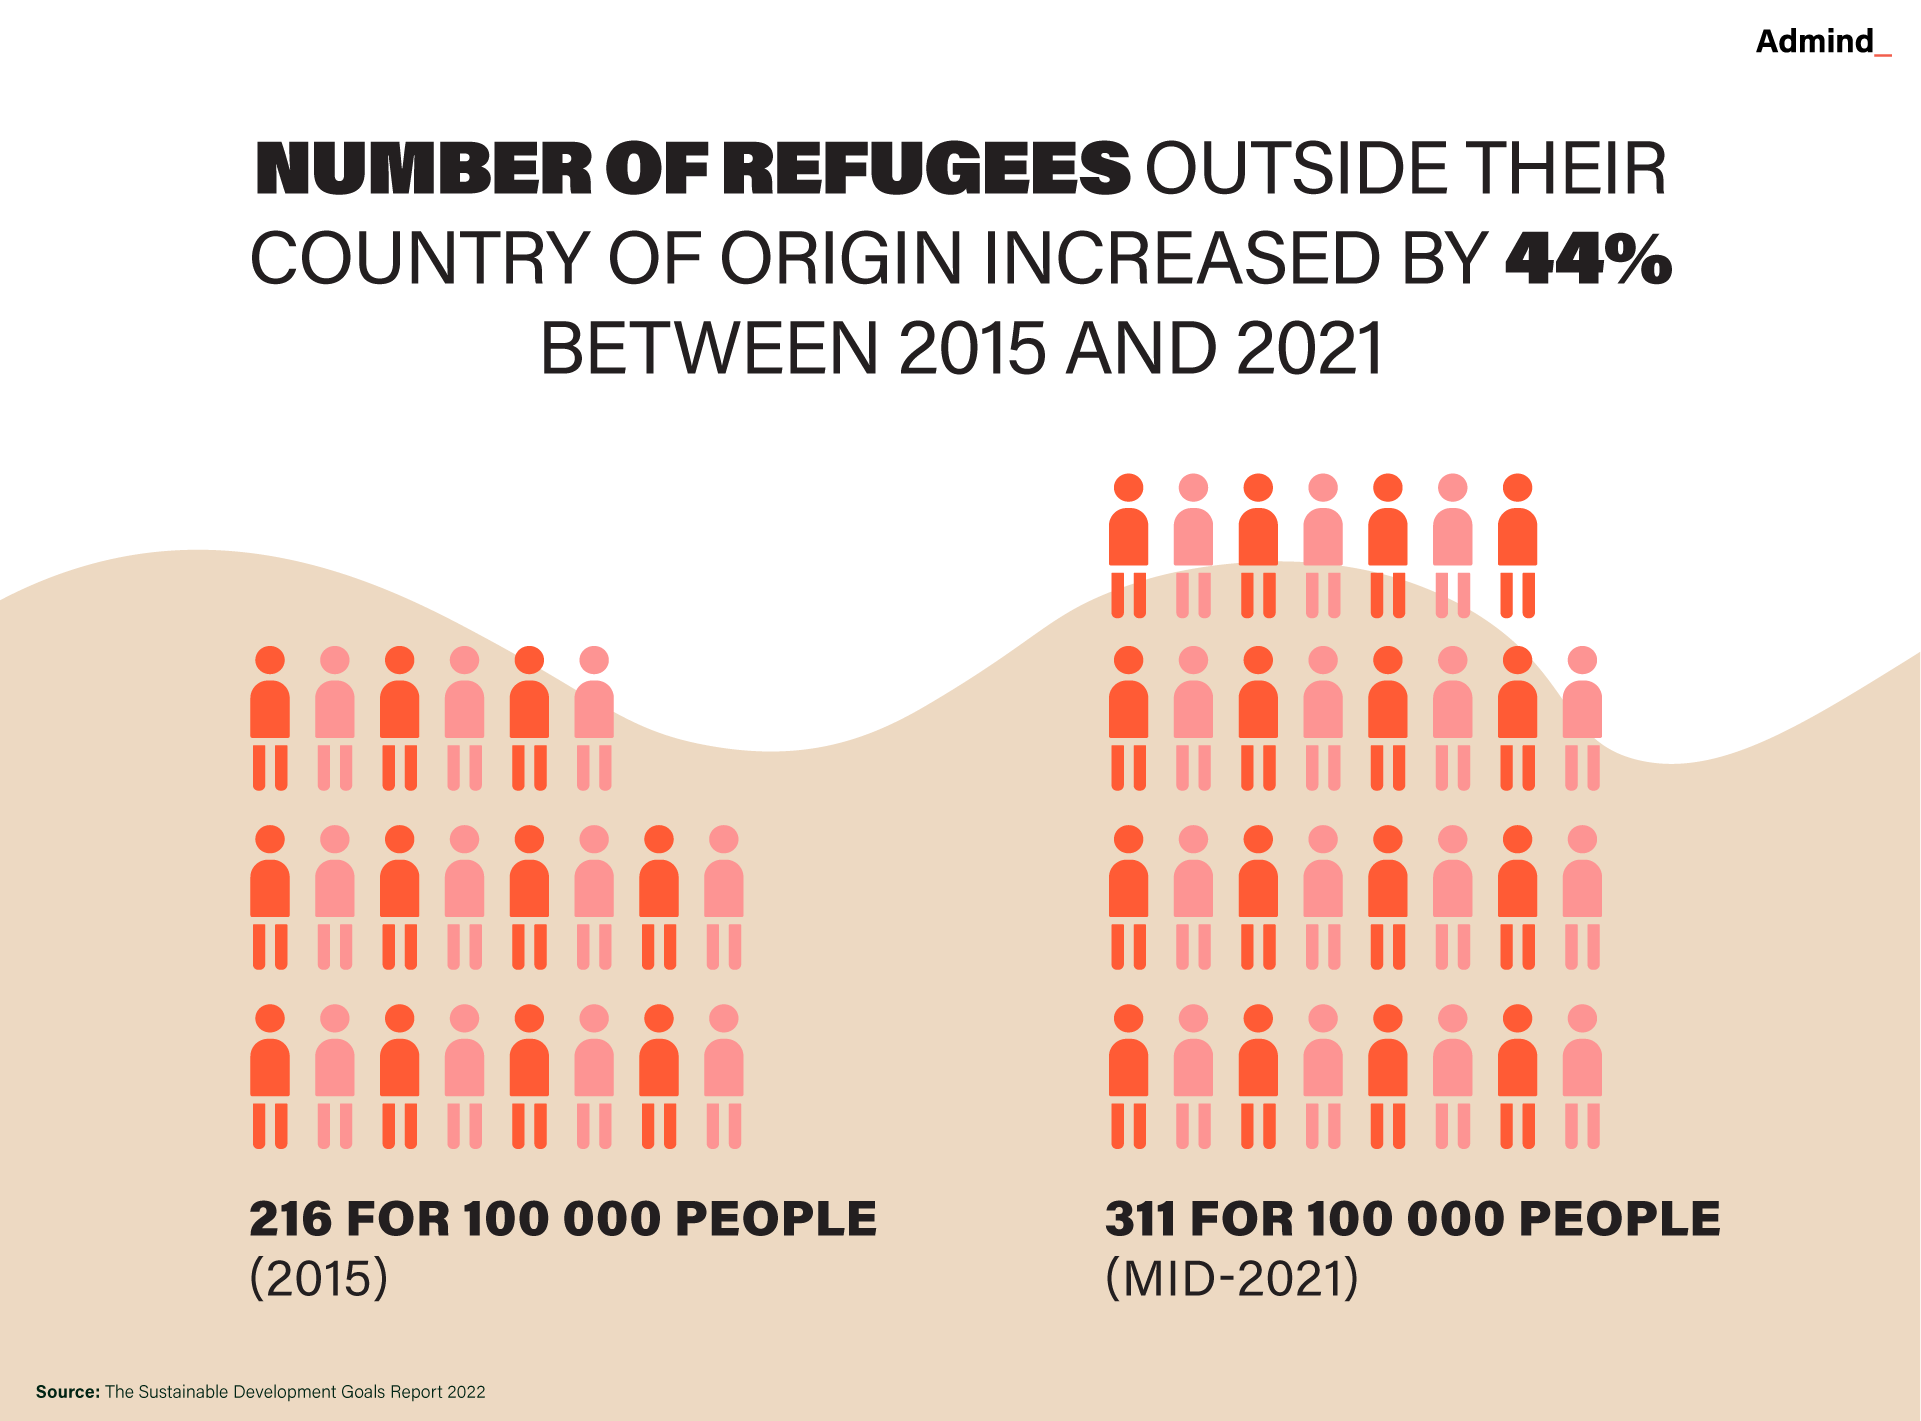 Number of refugees in the world between 2015 and 2021